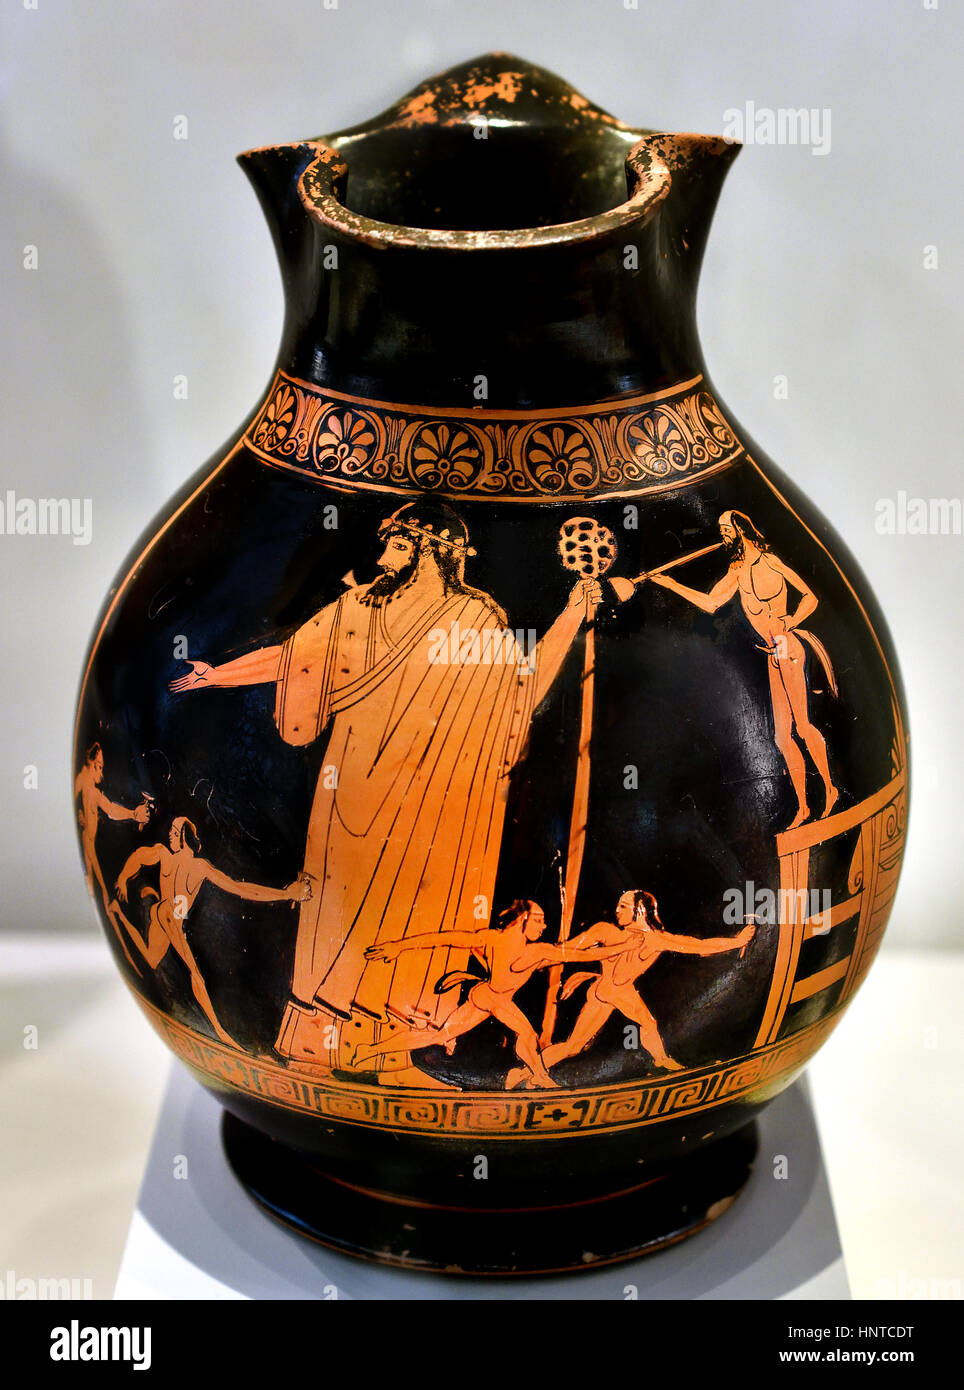 Greek hi-res photography and images - Alamy